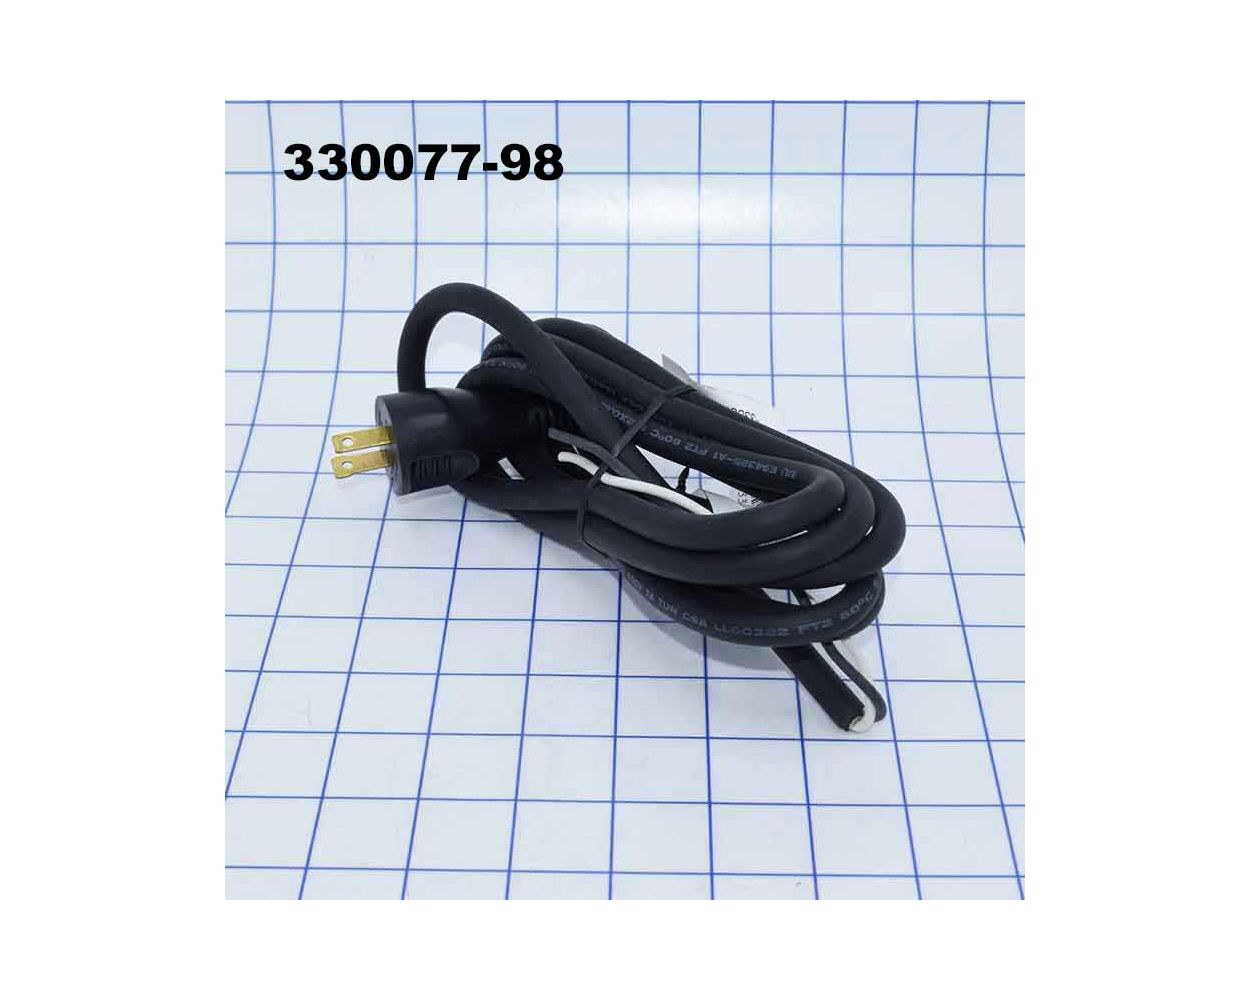 NEW 147770-98 REPLACEMENT POWER CORD 9' FOR DEWALT DW357  tools & OTHERS 